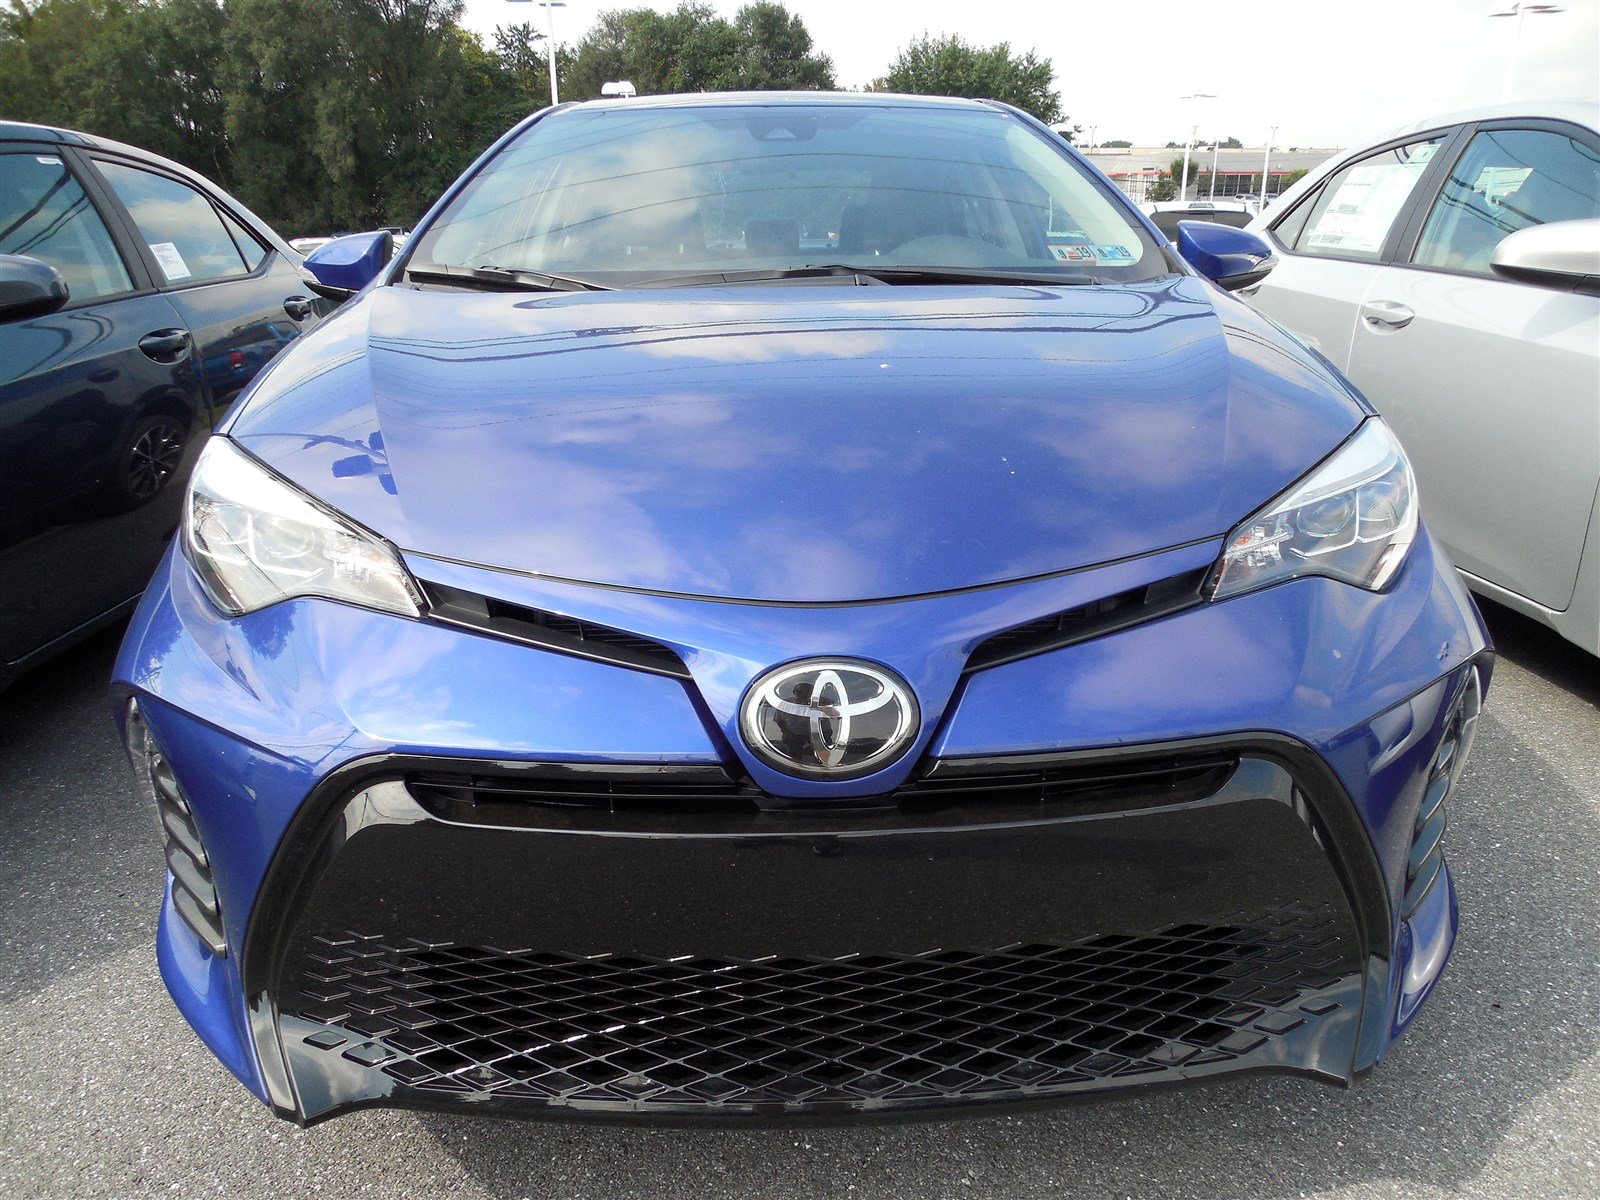 Toyota Corolla 2019 Se : 2019 Toyota Corolla For Sale | Review and